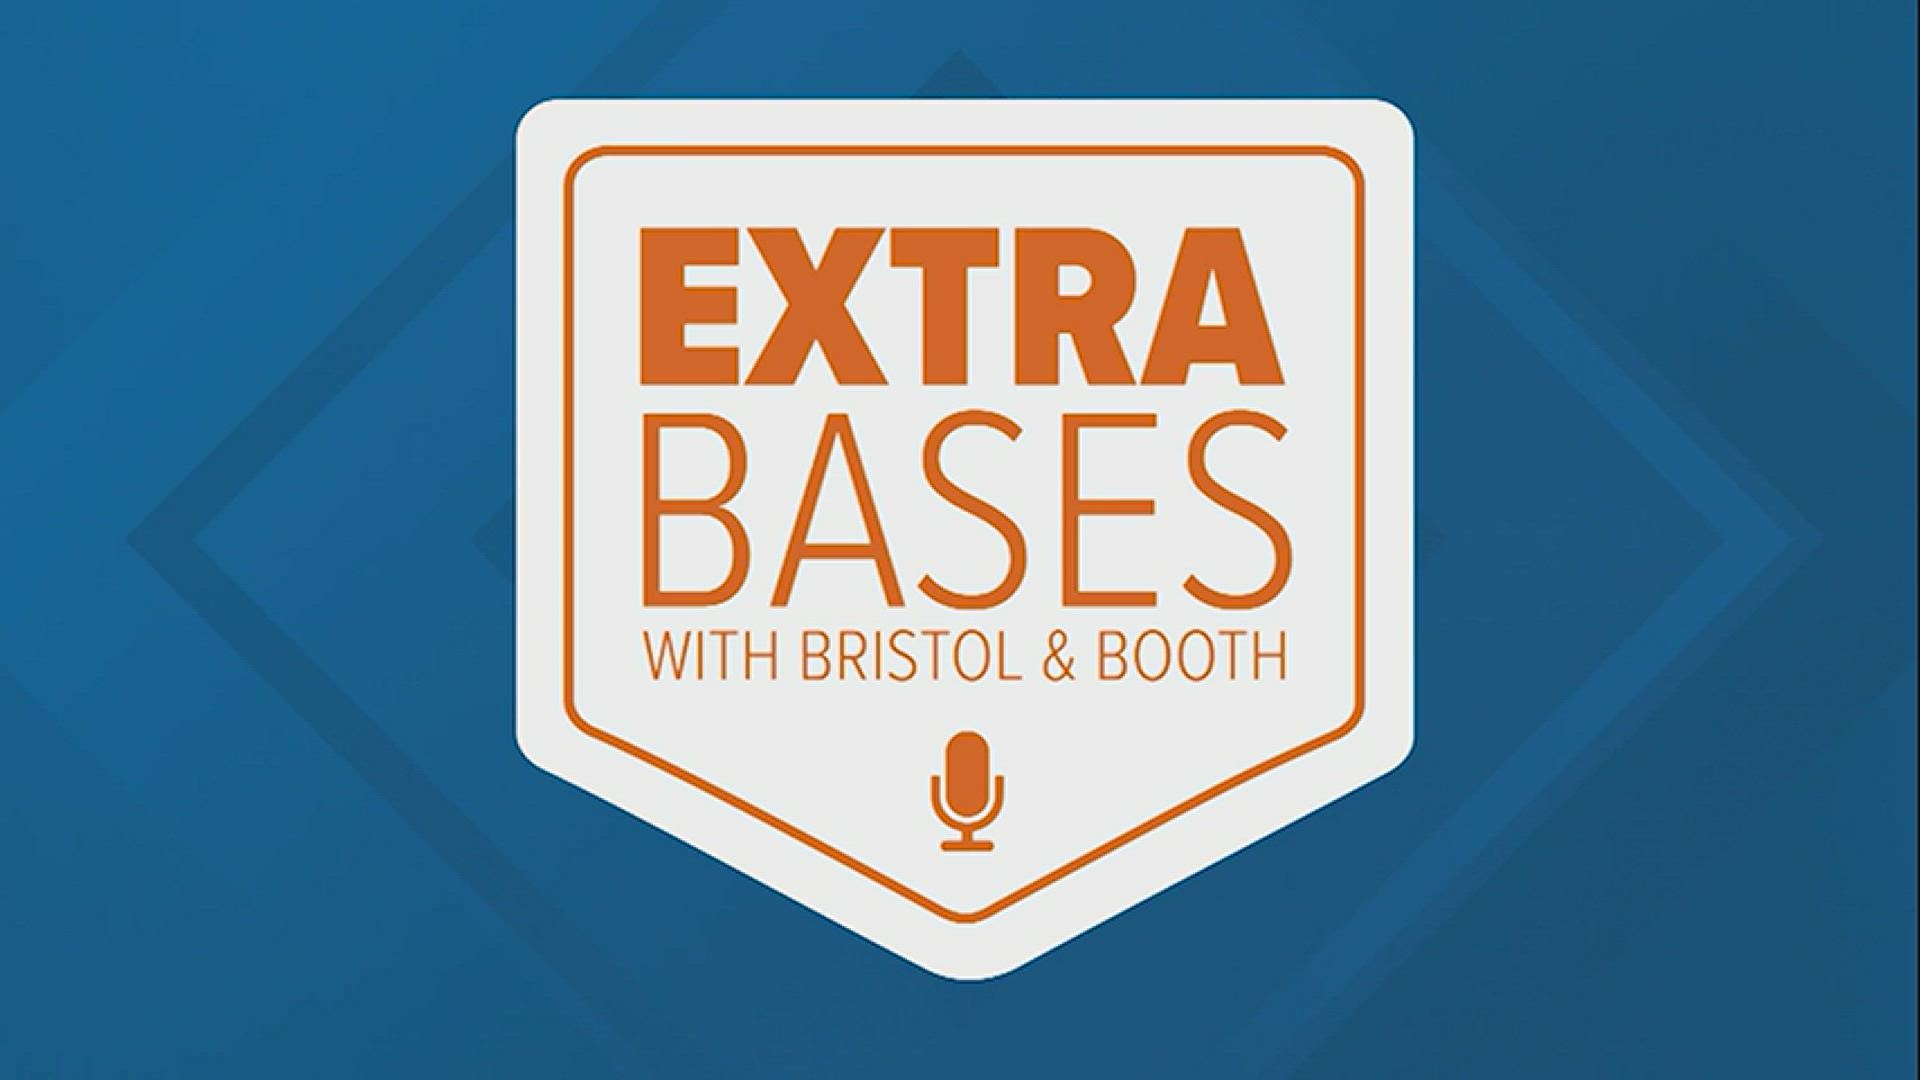 Former MLB scout Jeremy Booth and KHOU 11's Jason Bristol discuss factors impacting Astros' search for new GM on live edition of Extra Bases with Bristol & Booth.